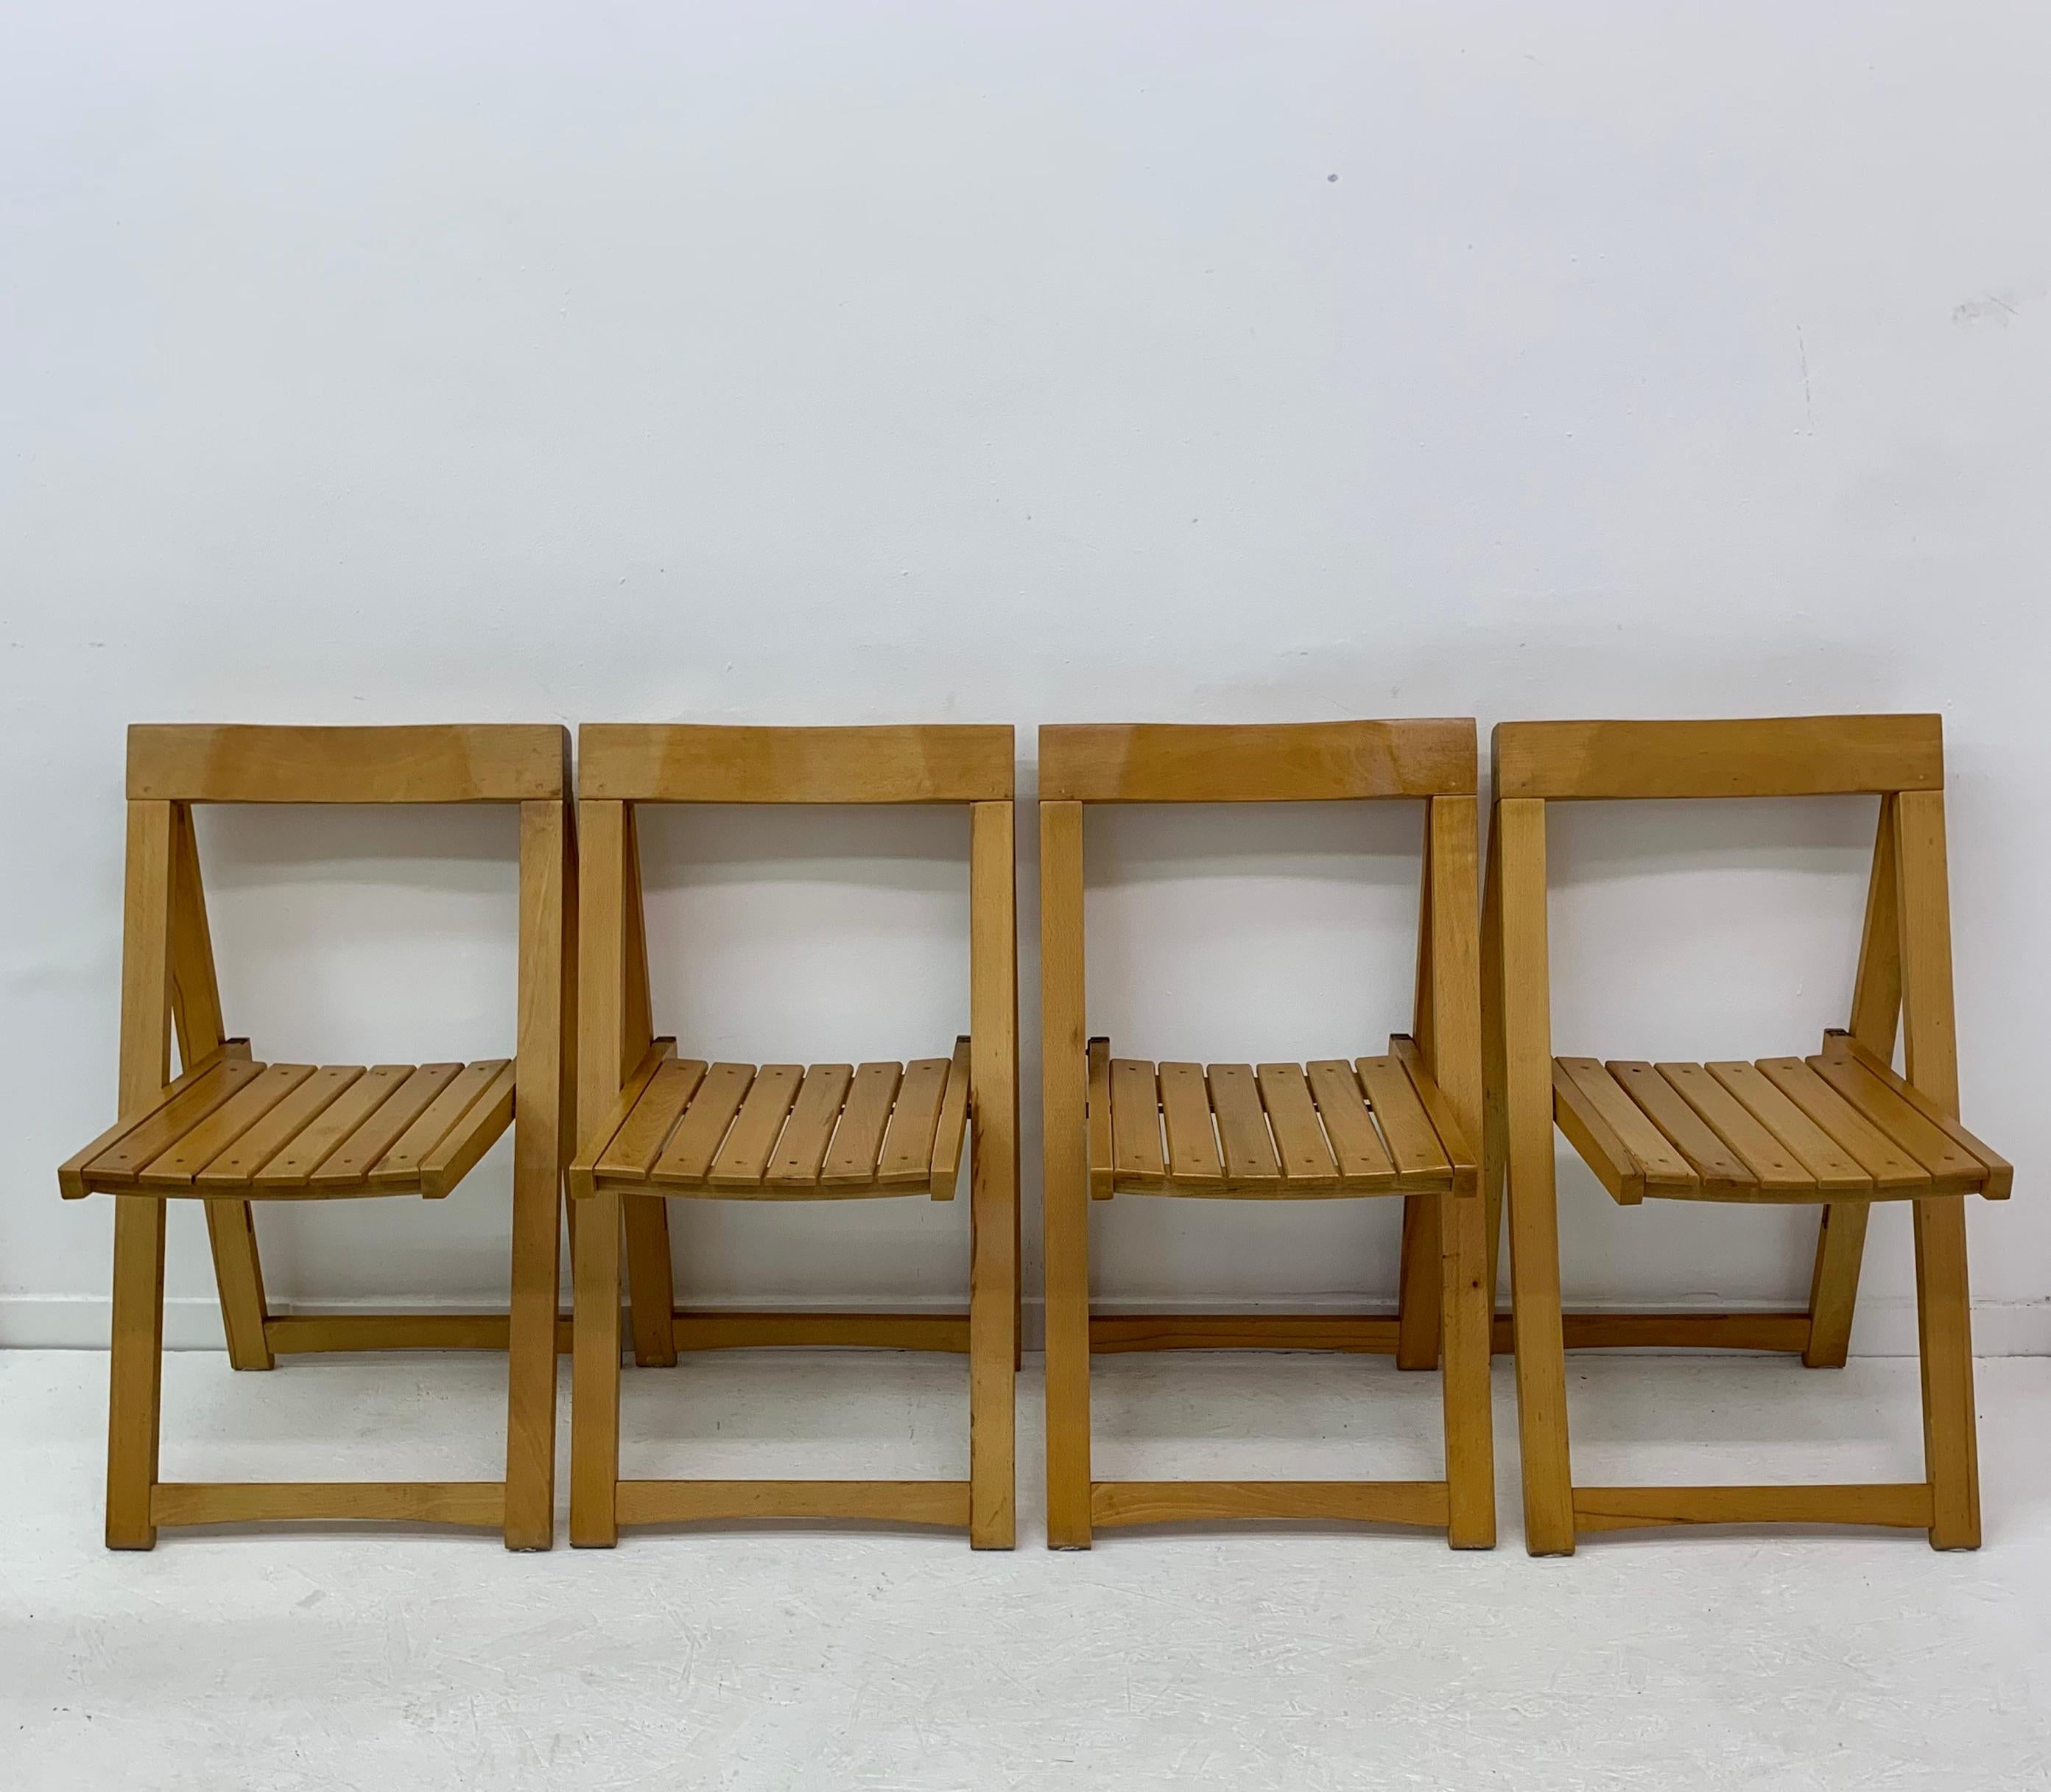 Set of 4 Aldo Jacober for Alberto Bazzani folding chairs, 1960’s In Good Condition For Sale In Delft, NL